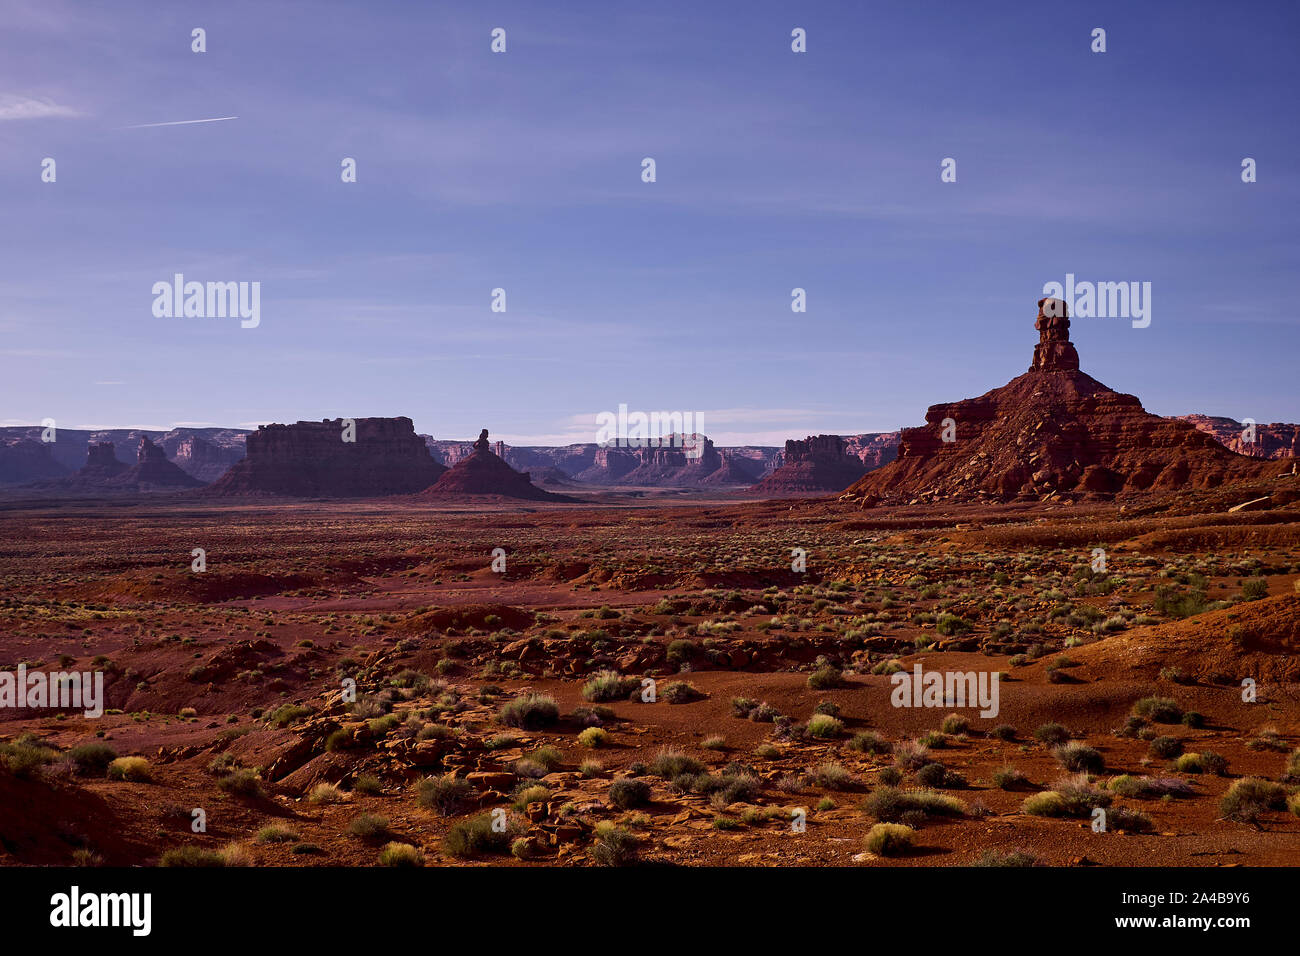 The landscape of Valley of the Gods, Utah, USA Stock Photo